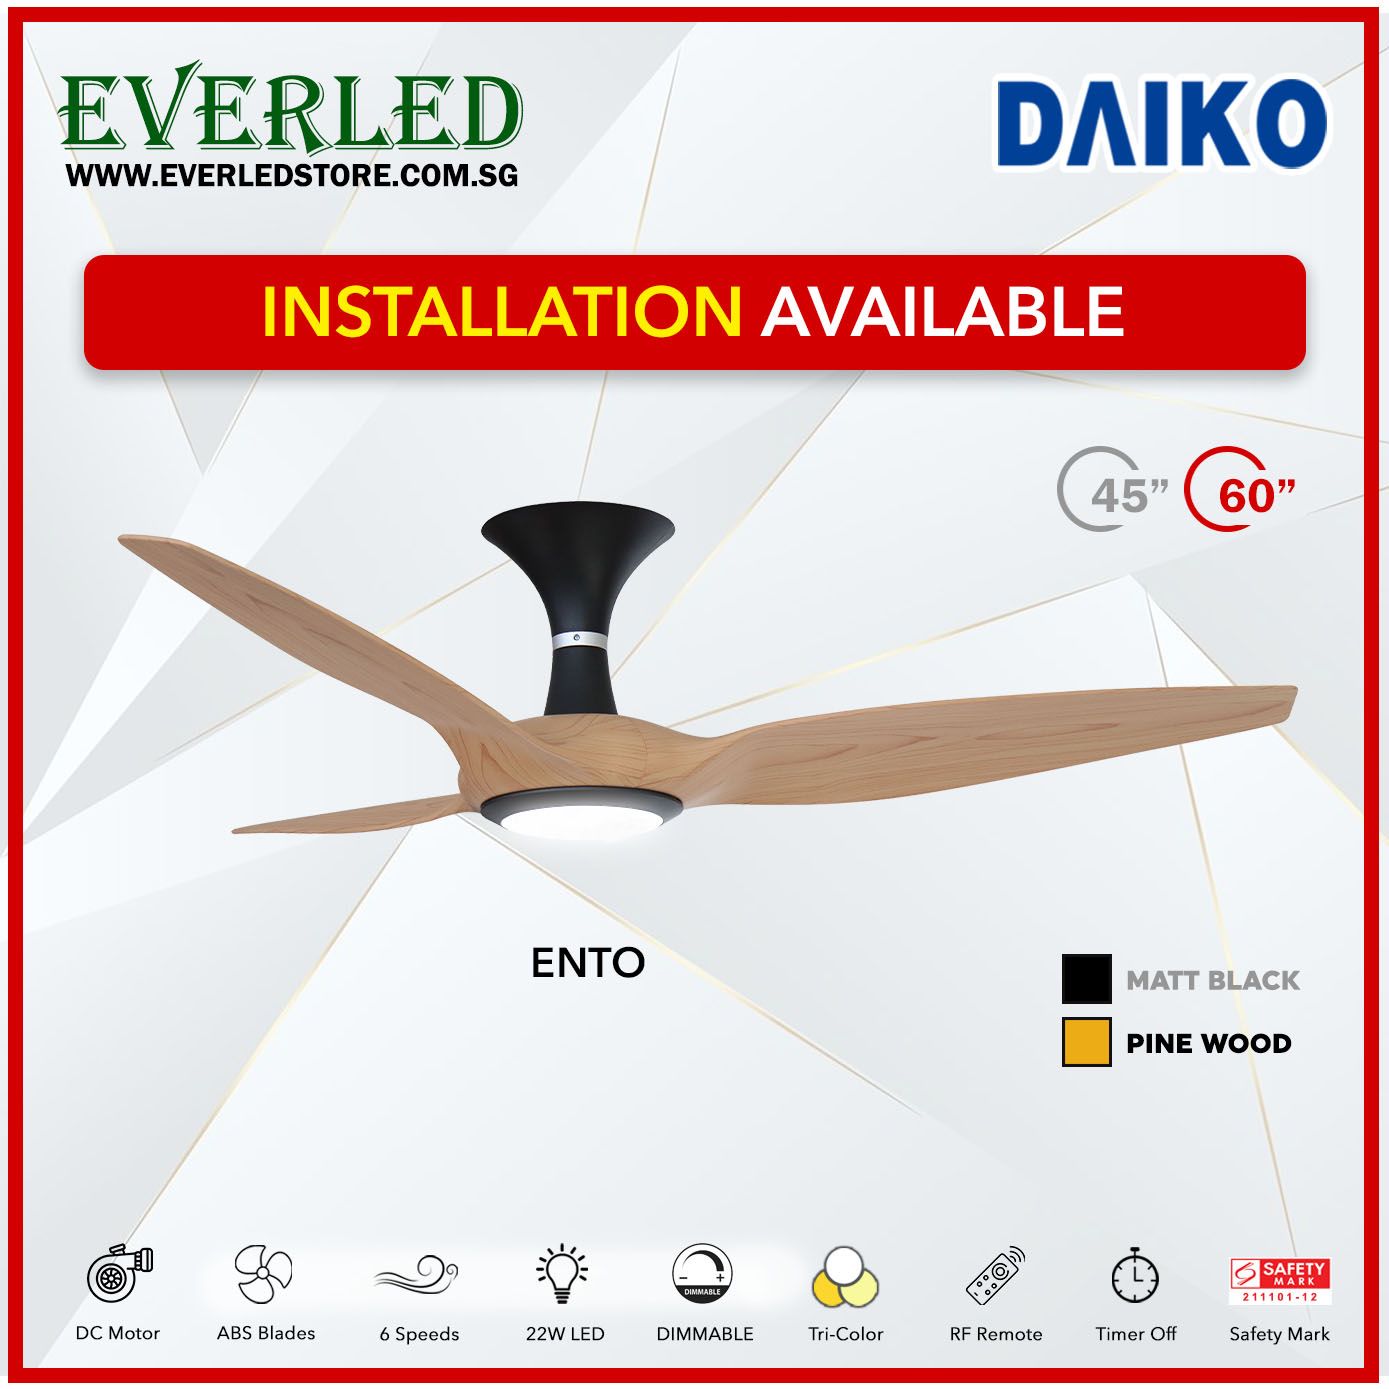 Daiko DC Ento 45"/60" with Dimmable Tri-color LED (Inverter DC Fan)